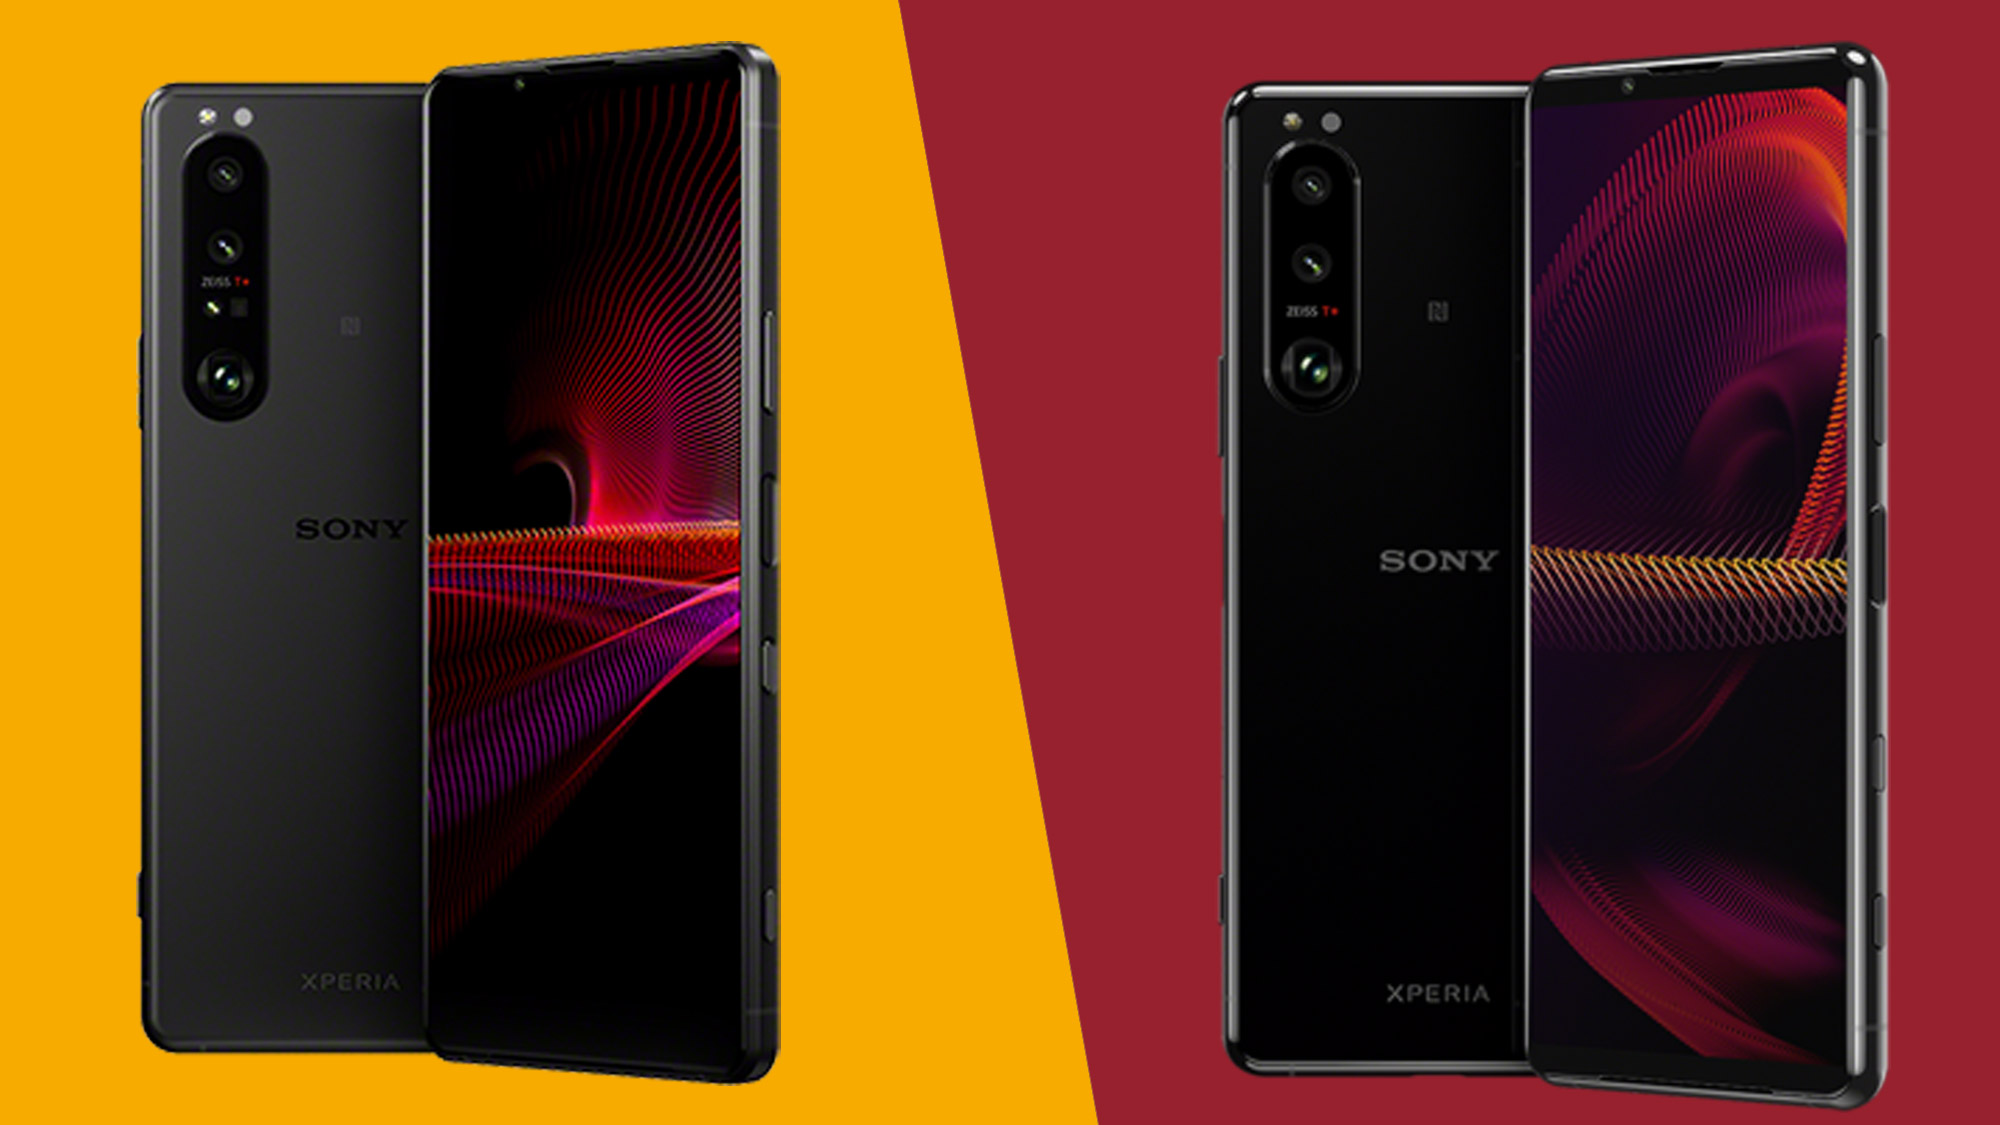 Sony Xperia 1 III vs Sony Xperia 1 II: a 4K Android phone face-off